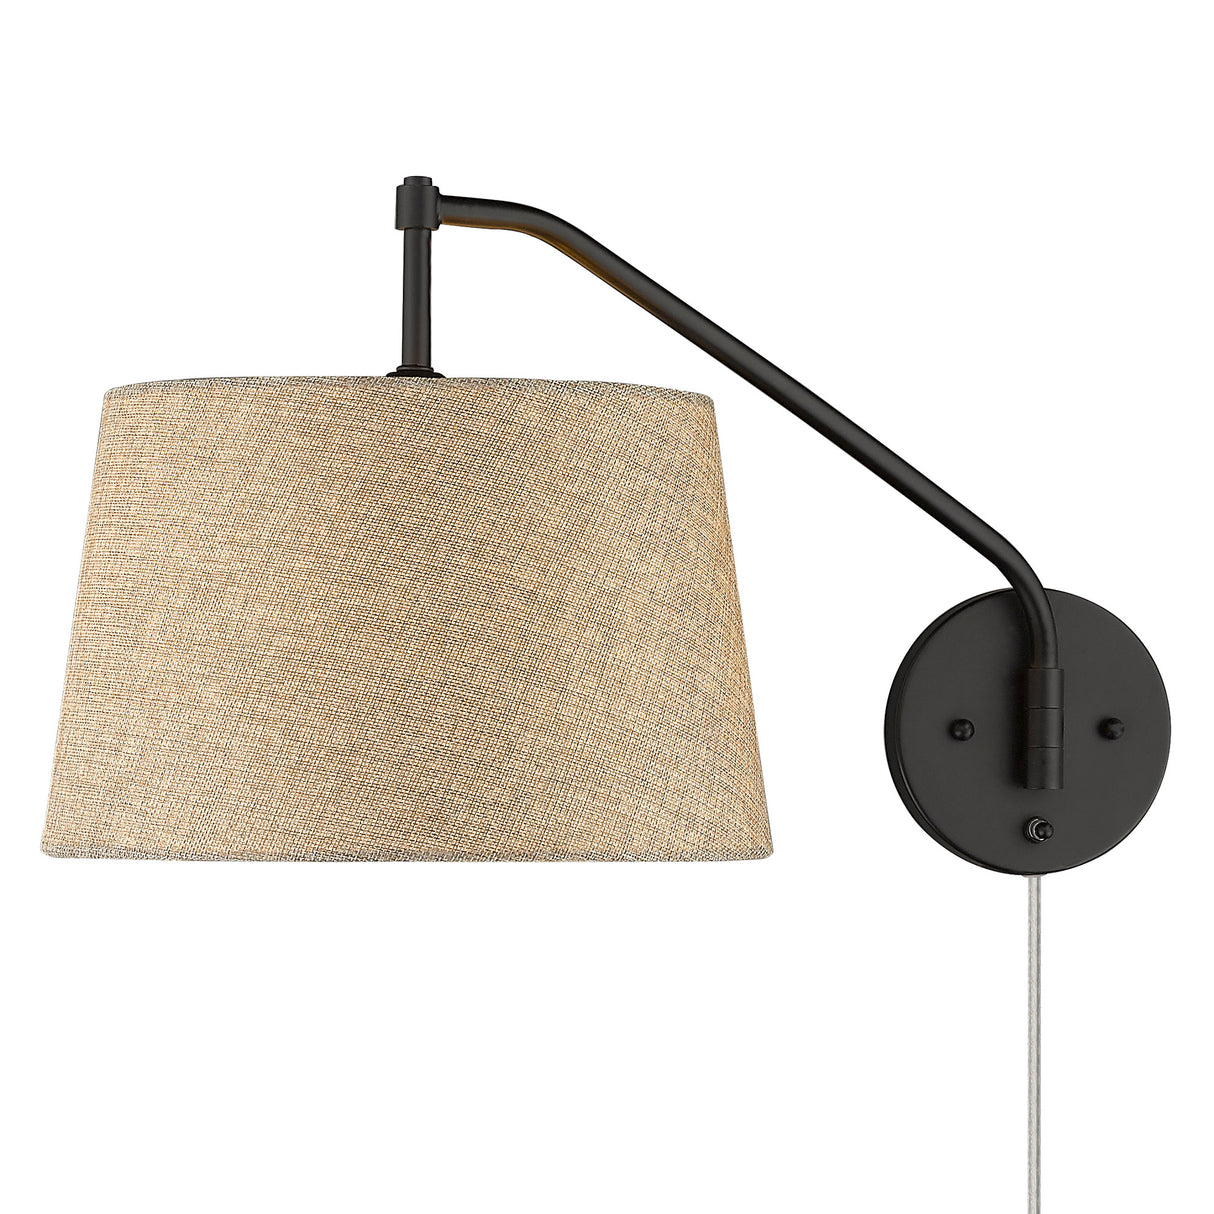 Ryleigh Articulating Wall Sconce in Matte Black with Natural Sisal Shade